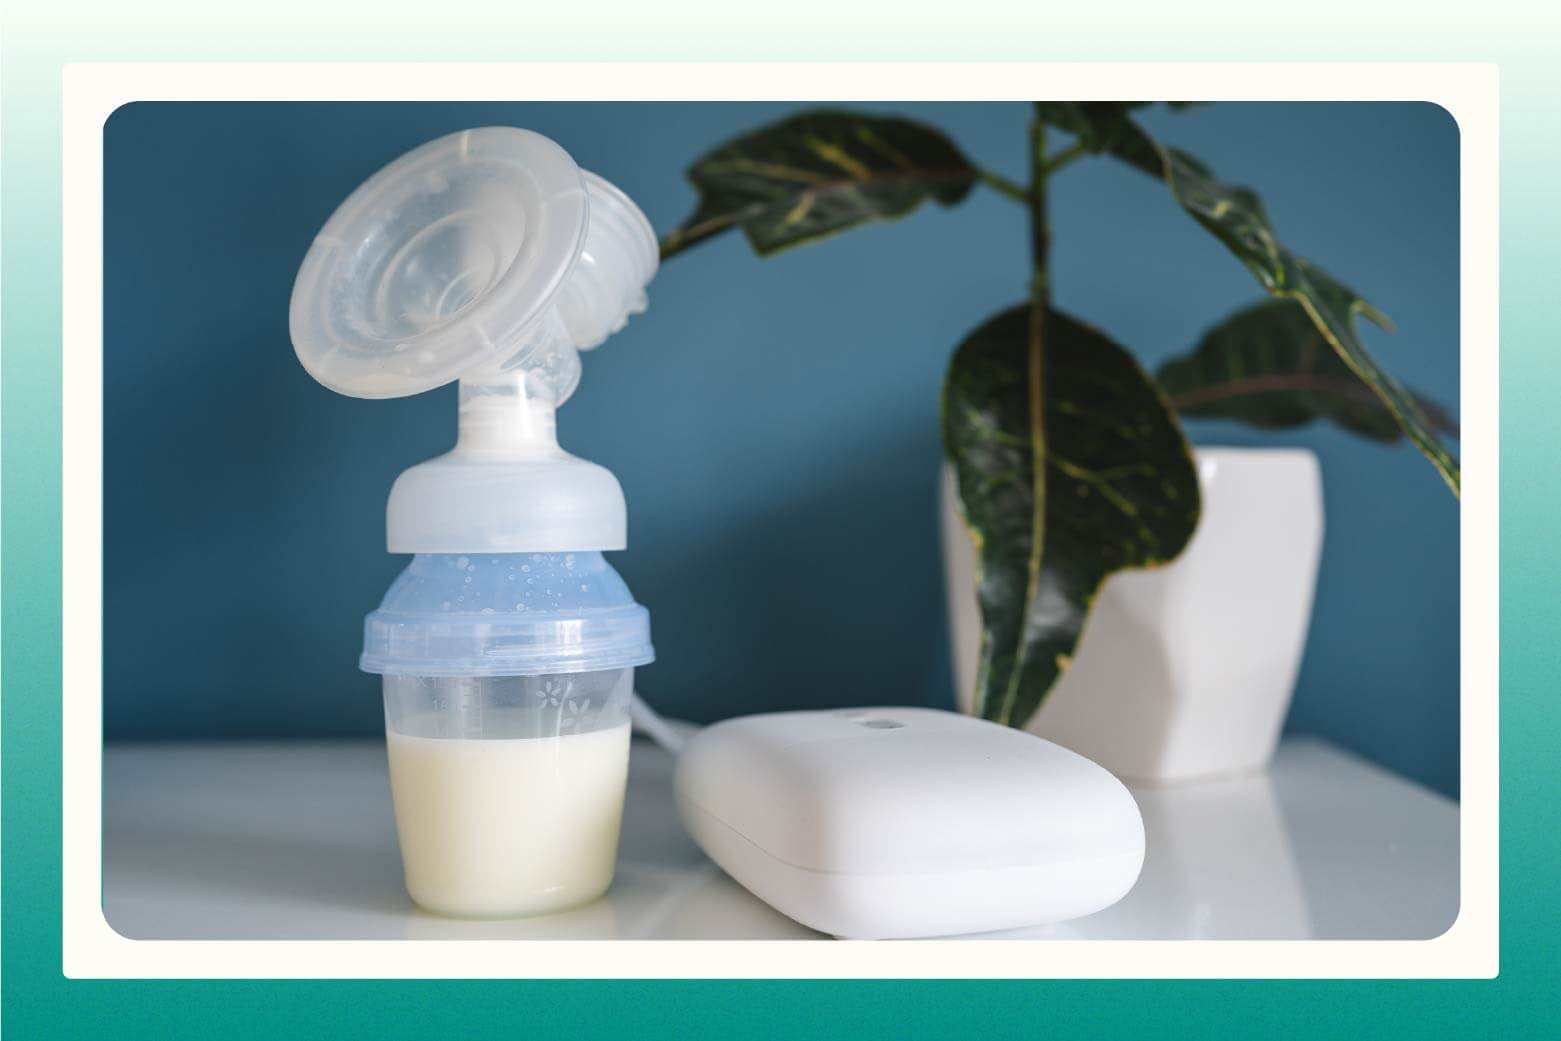 Half filled breast pump with attached bottle sitting on counter with potted plant in background